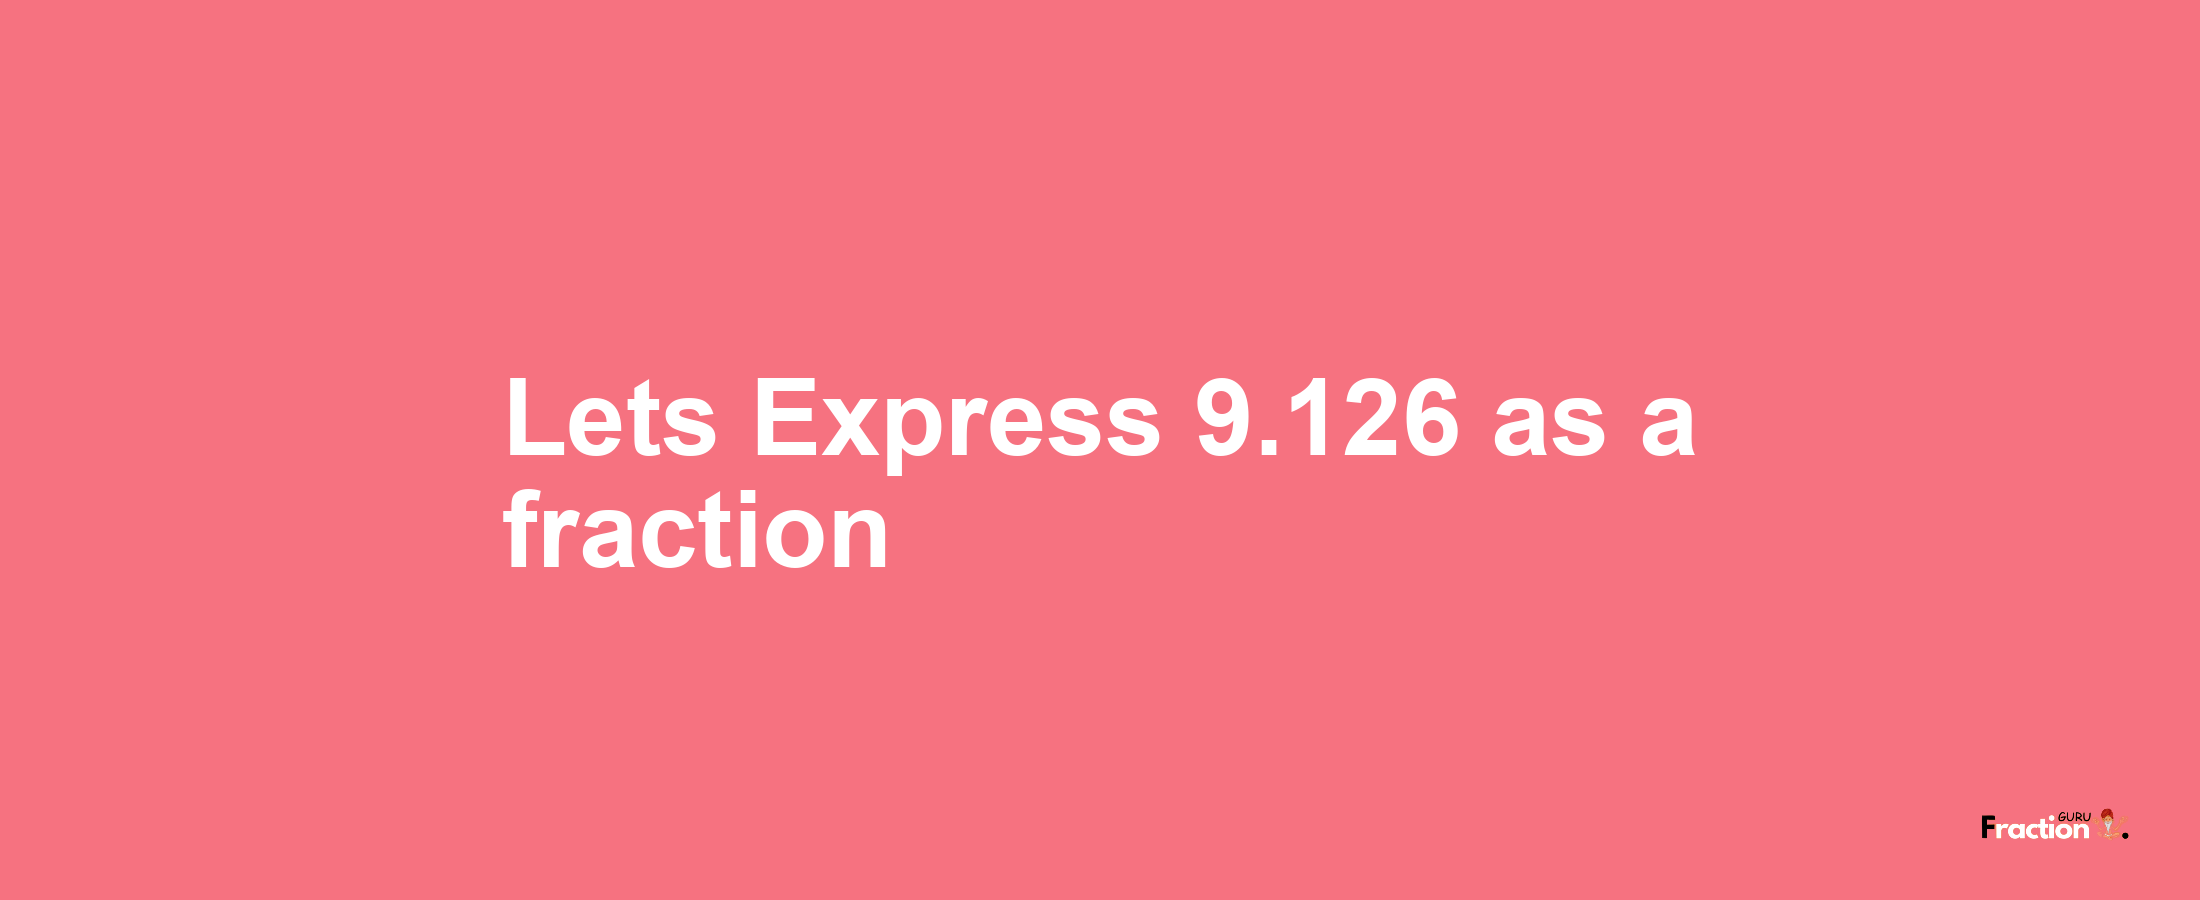 Lets Express 9.126 as afraction